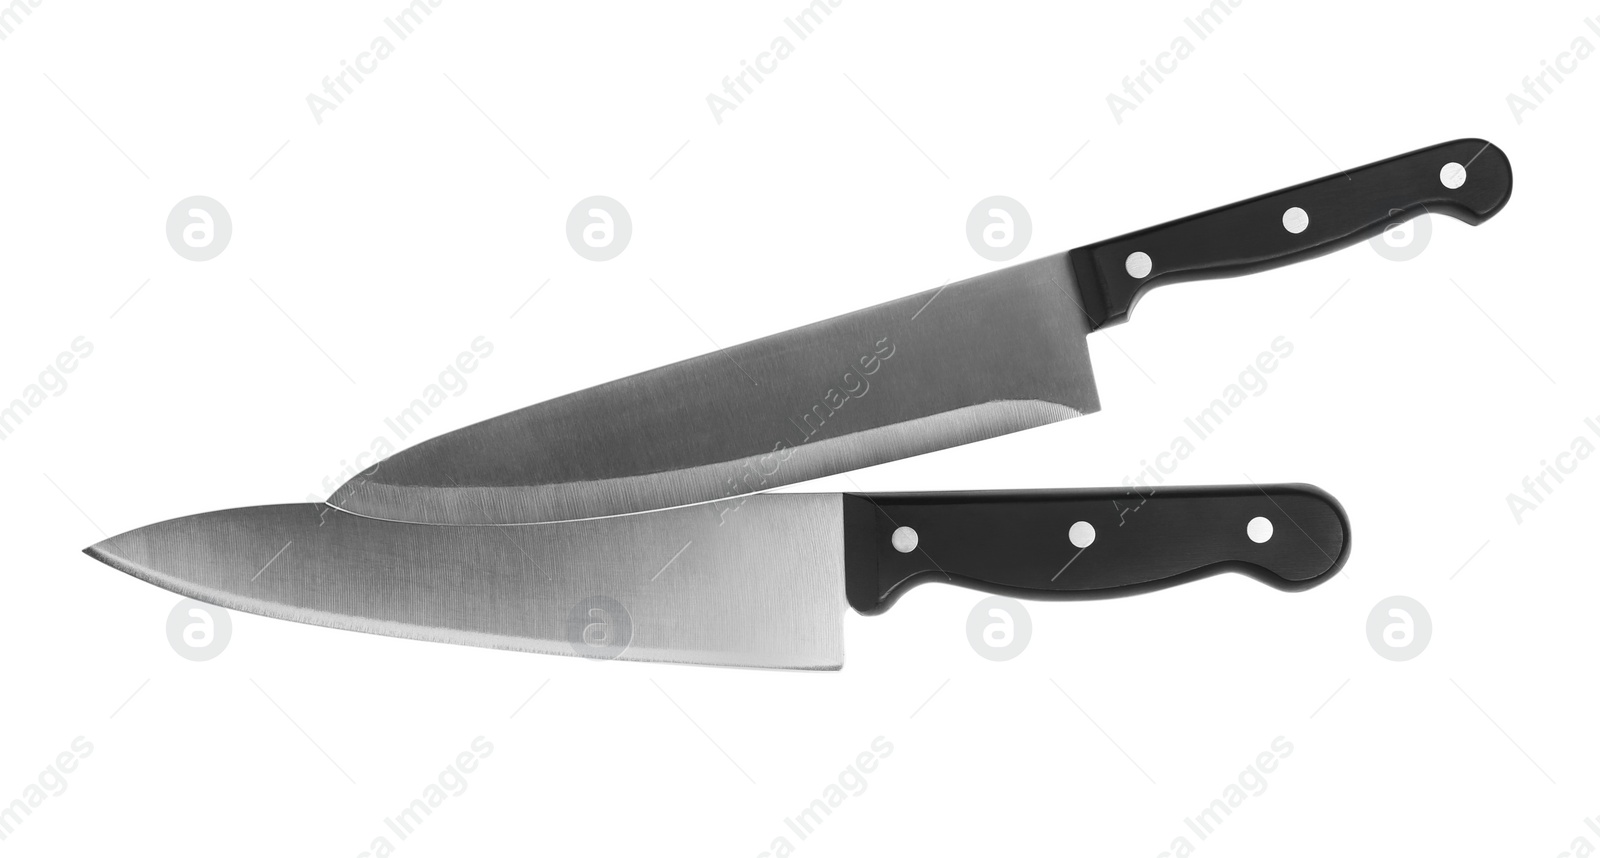 Photo of Stainless steel chef's knives on white background, top view